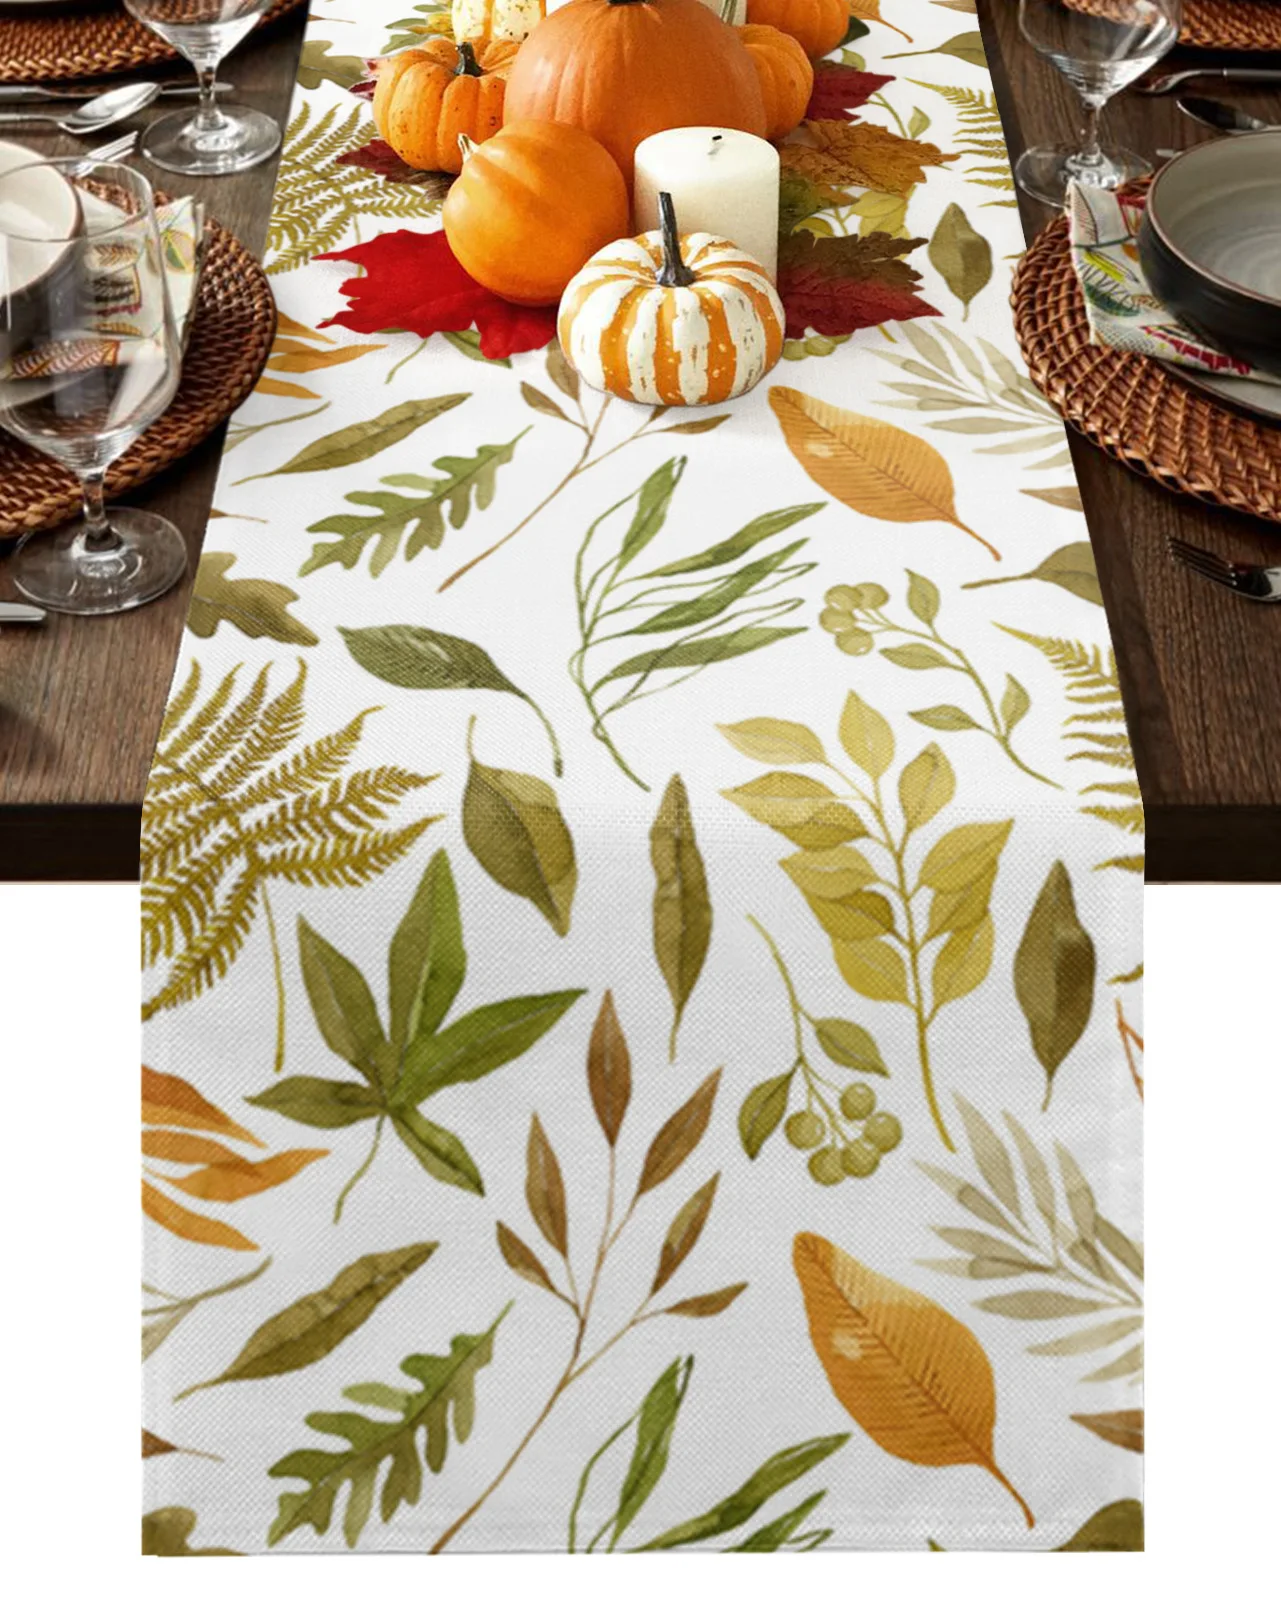 

Autumn Maple Texture Dining Table Runner Banquet Feastival Party Tablecloth Modern Printed Table Runners Placemat